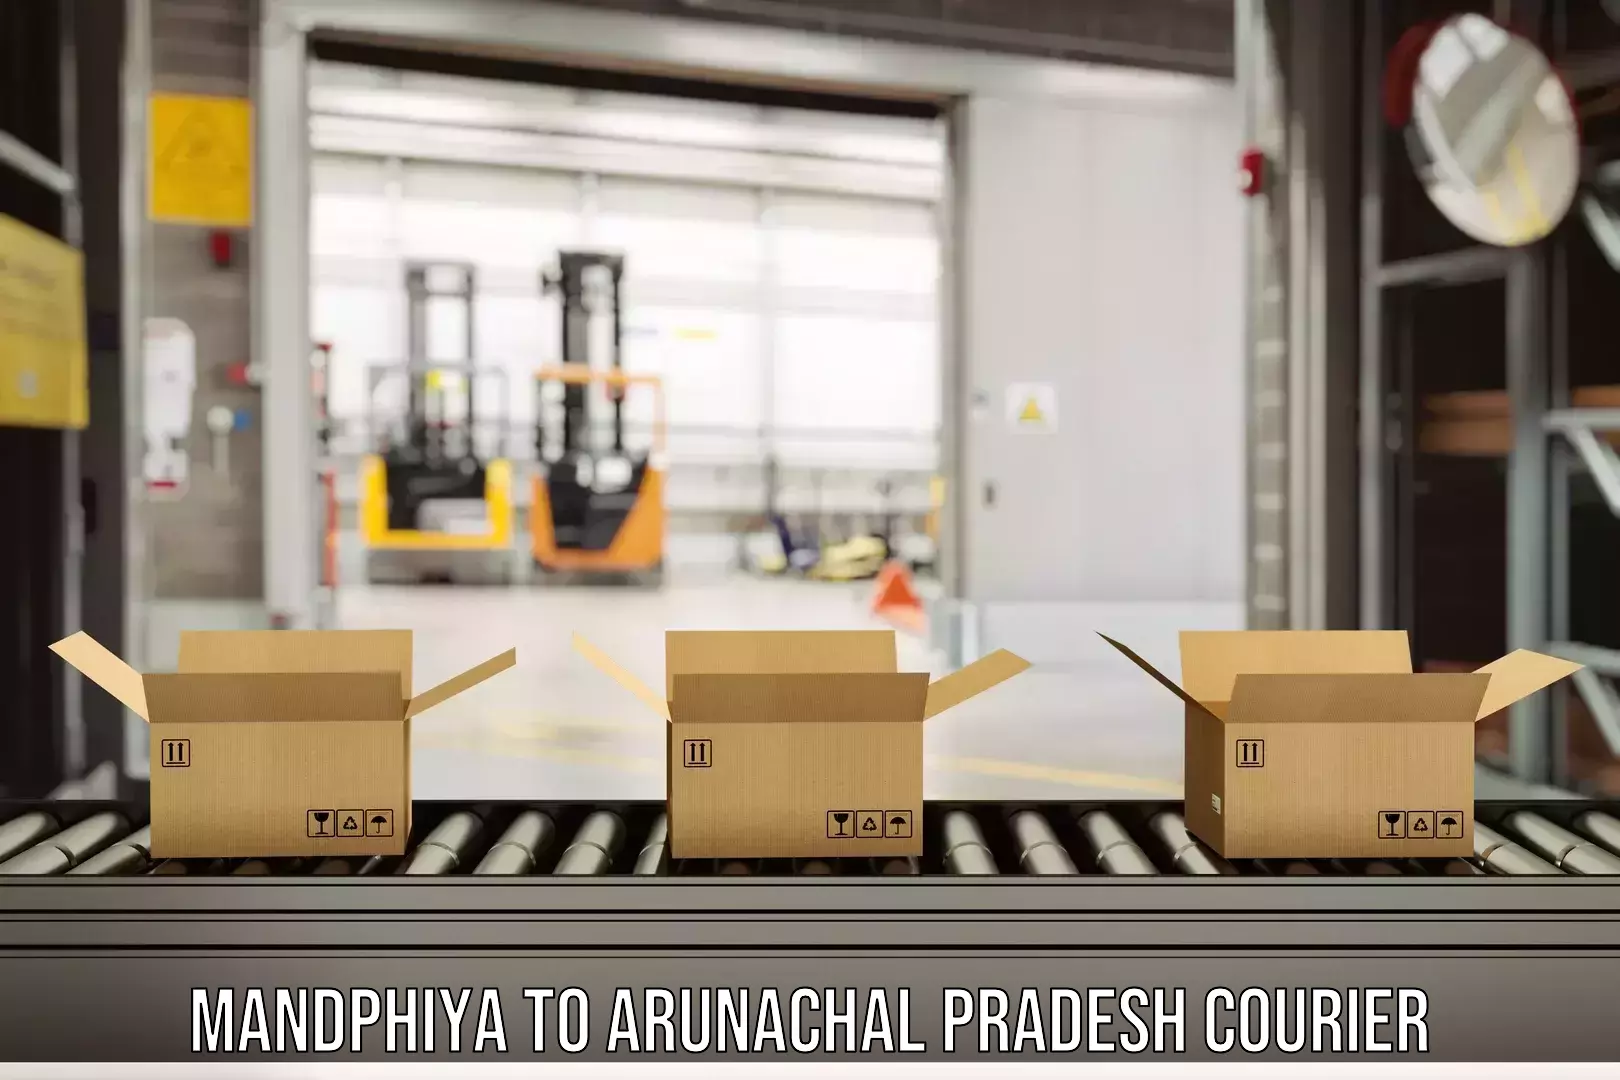 State-of-the-art courier technology Mandphiya to Aalo